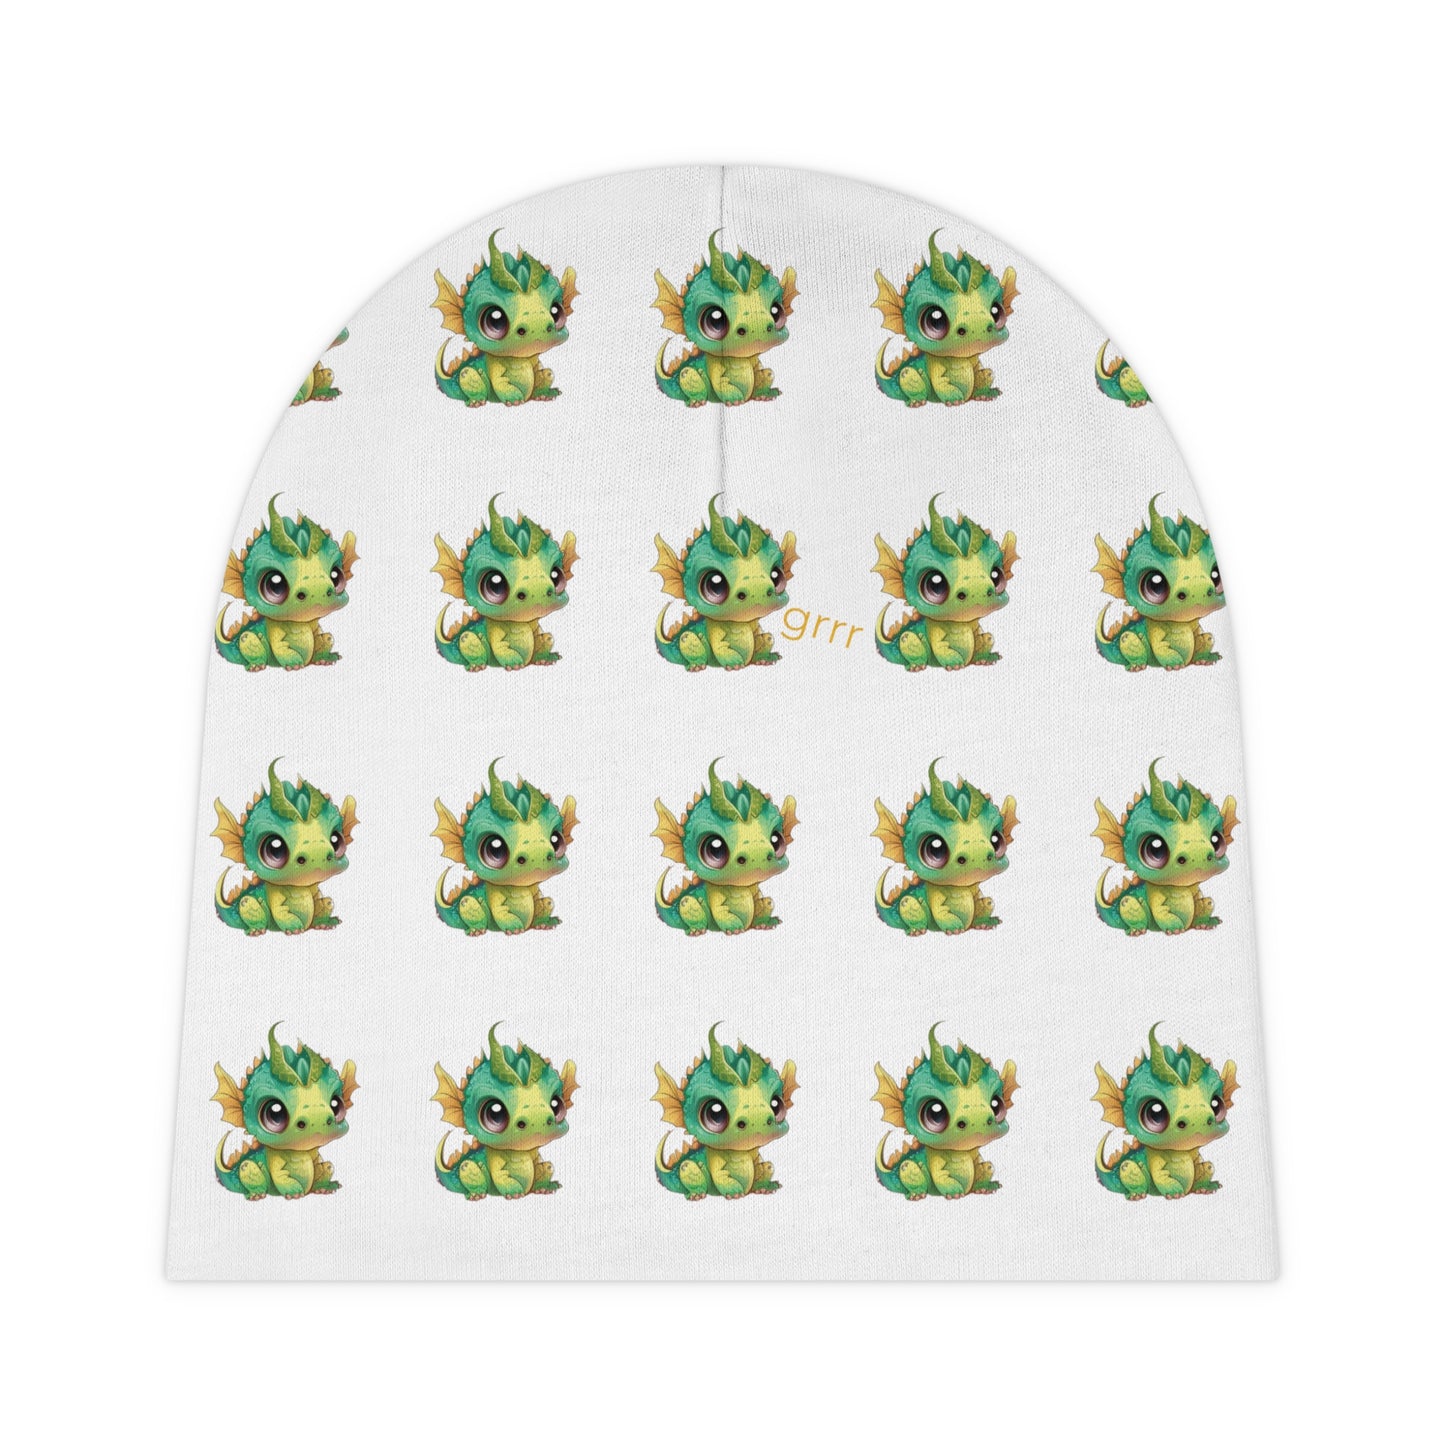 A darling baby beanie cap with green baby Bobby Dragons all over it - one little dragon is saying grrr - lol - so fun.